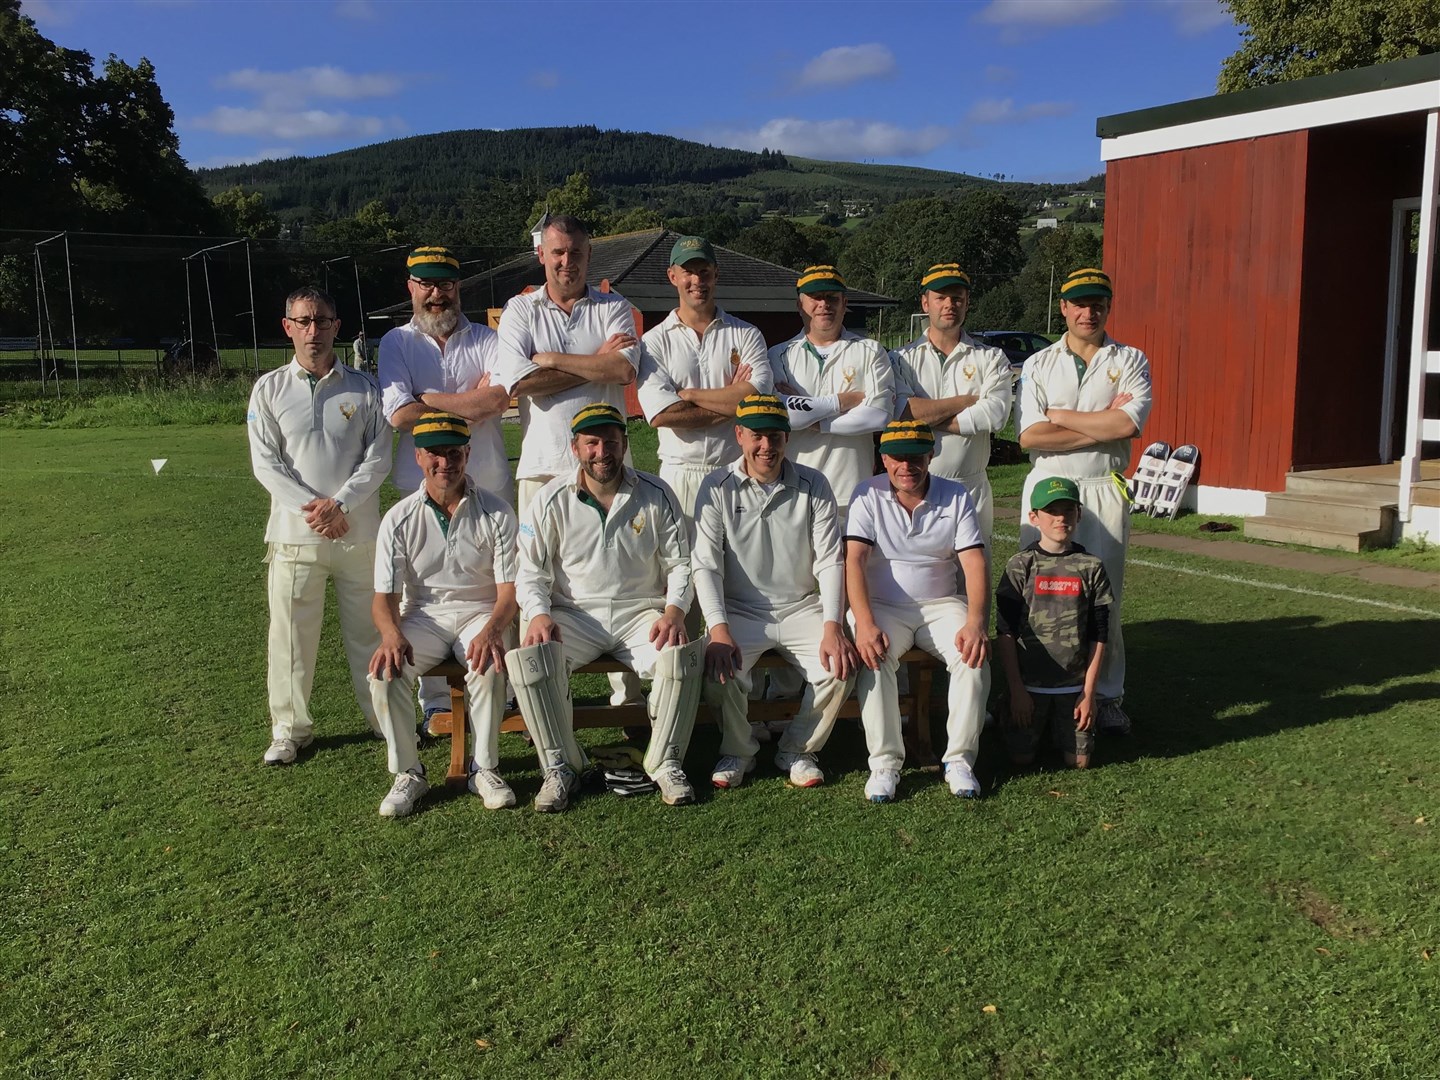 Ross County Cricket Club's 2019 squad that finished third in the Nosca table.